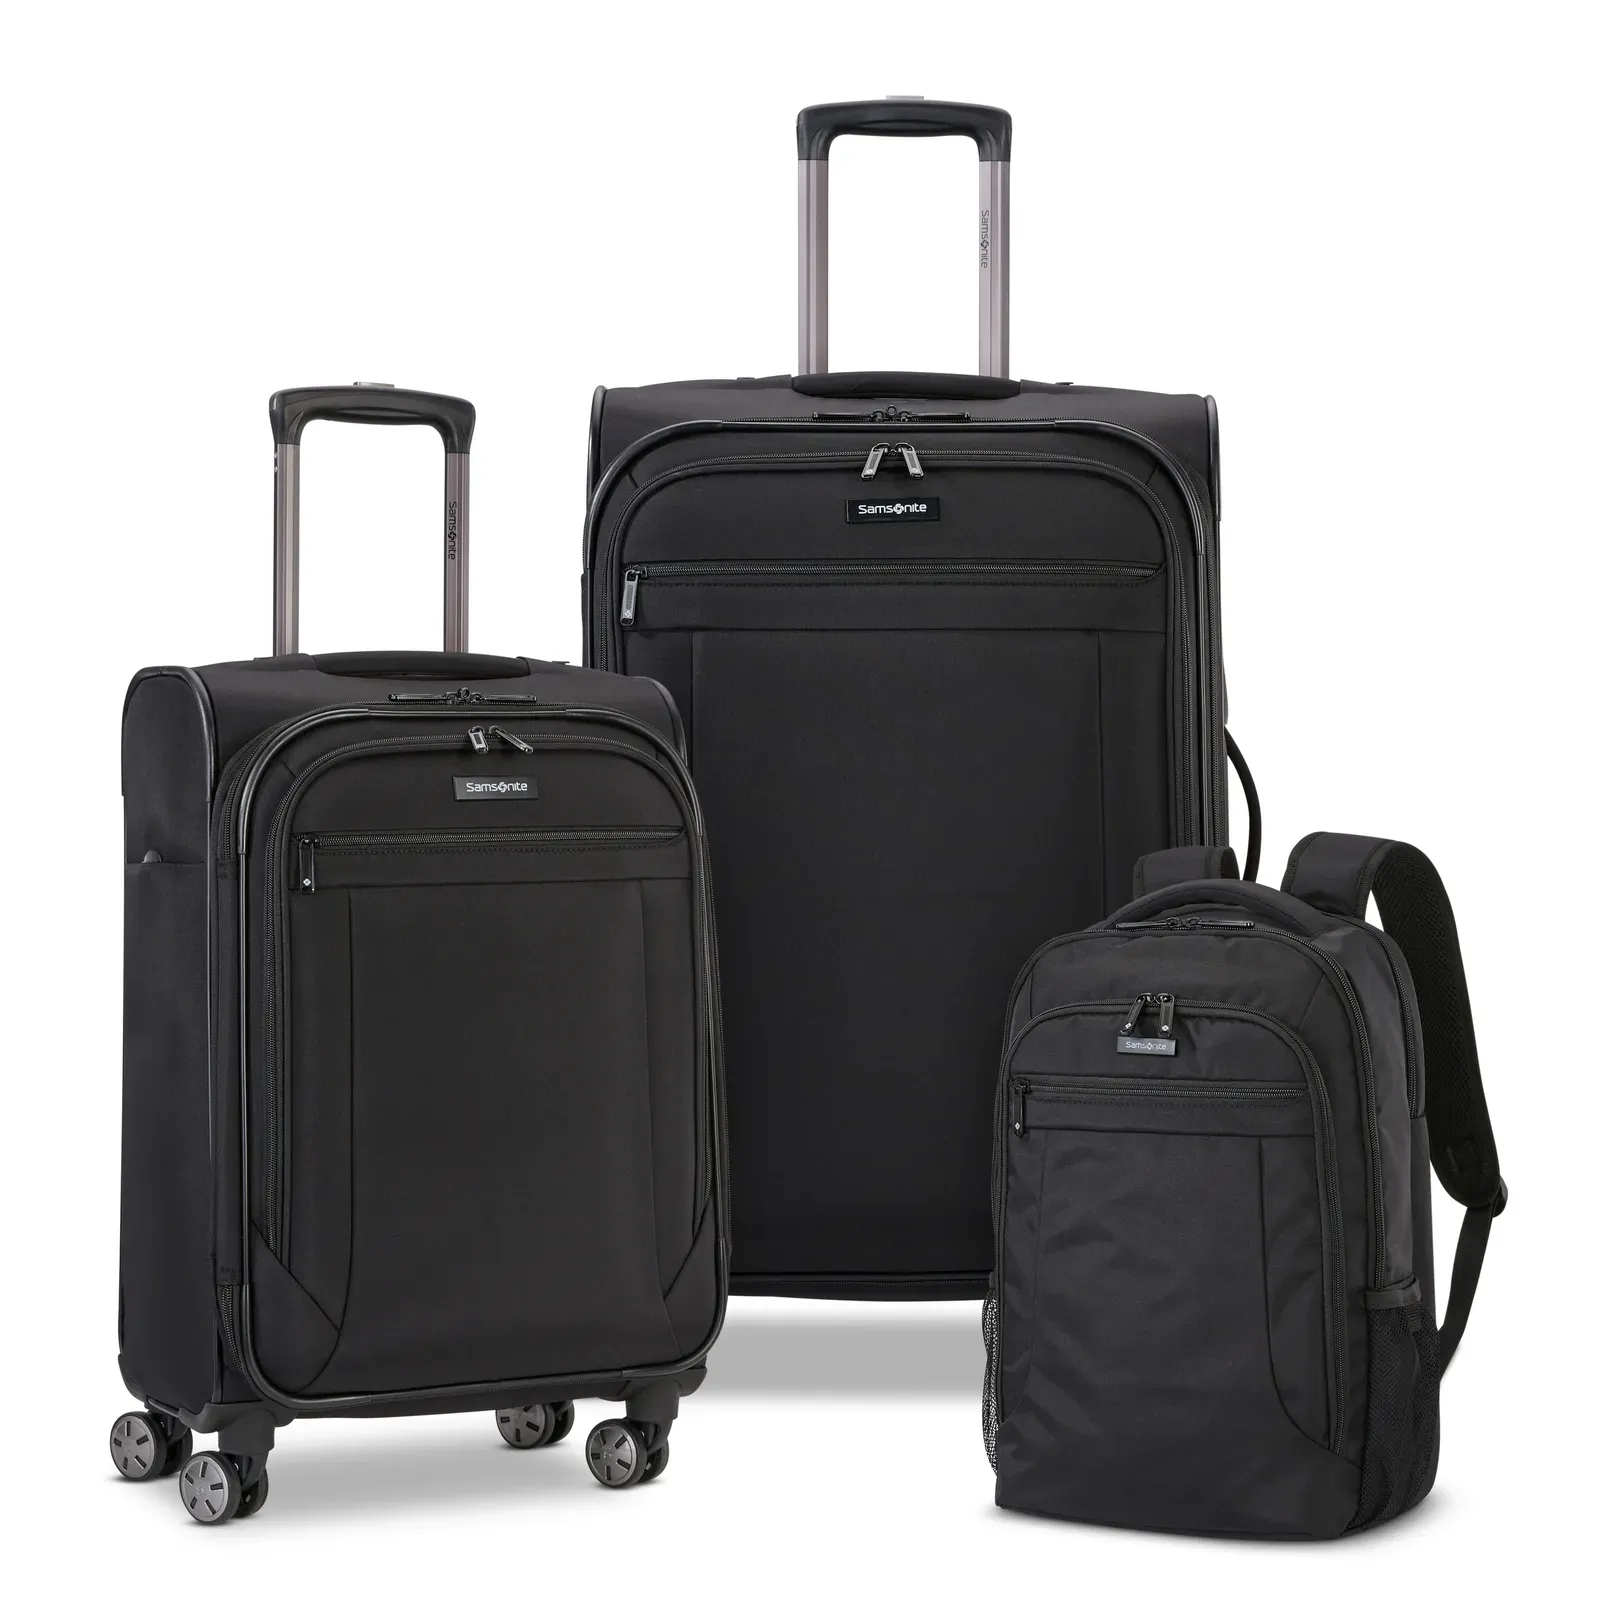 Two black rolling suitcases and a black backpack.